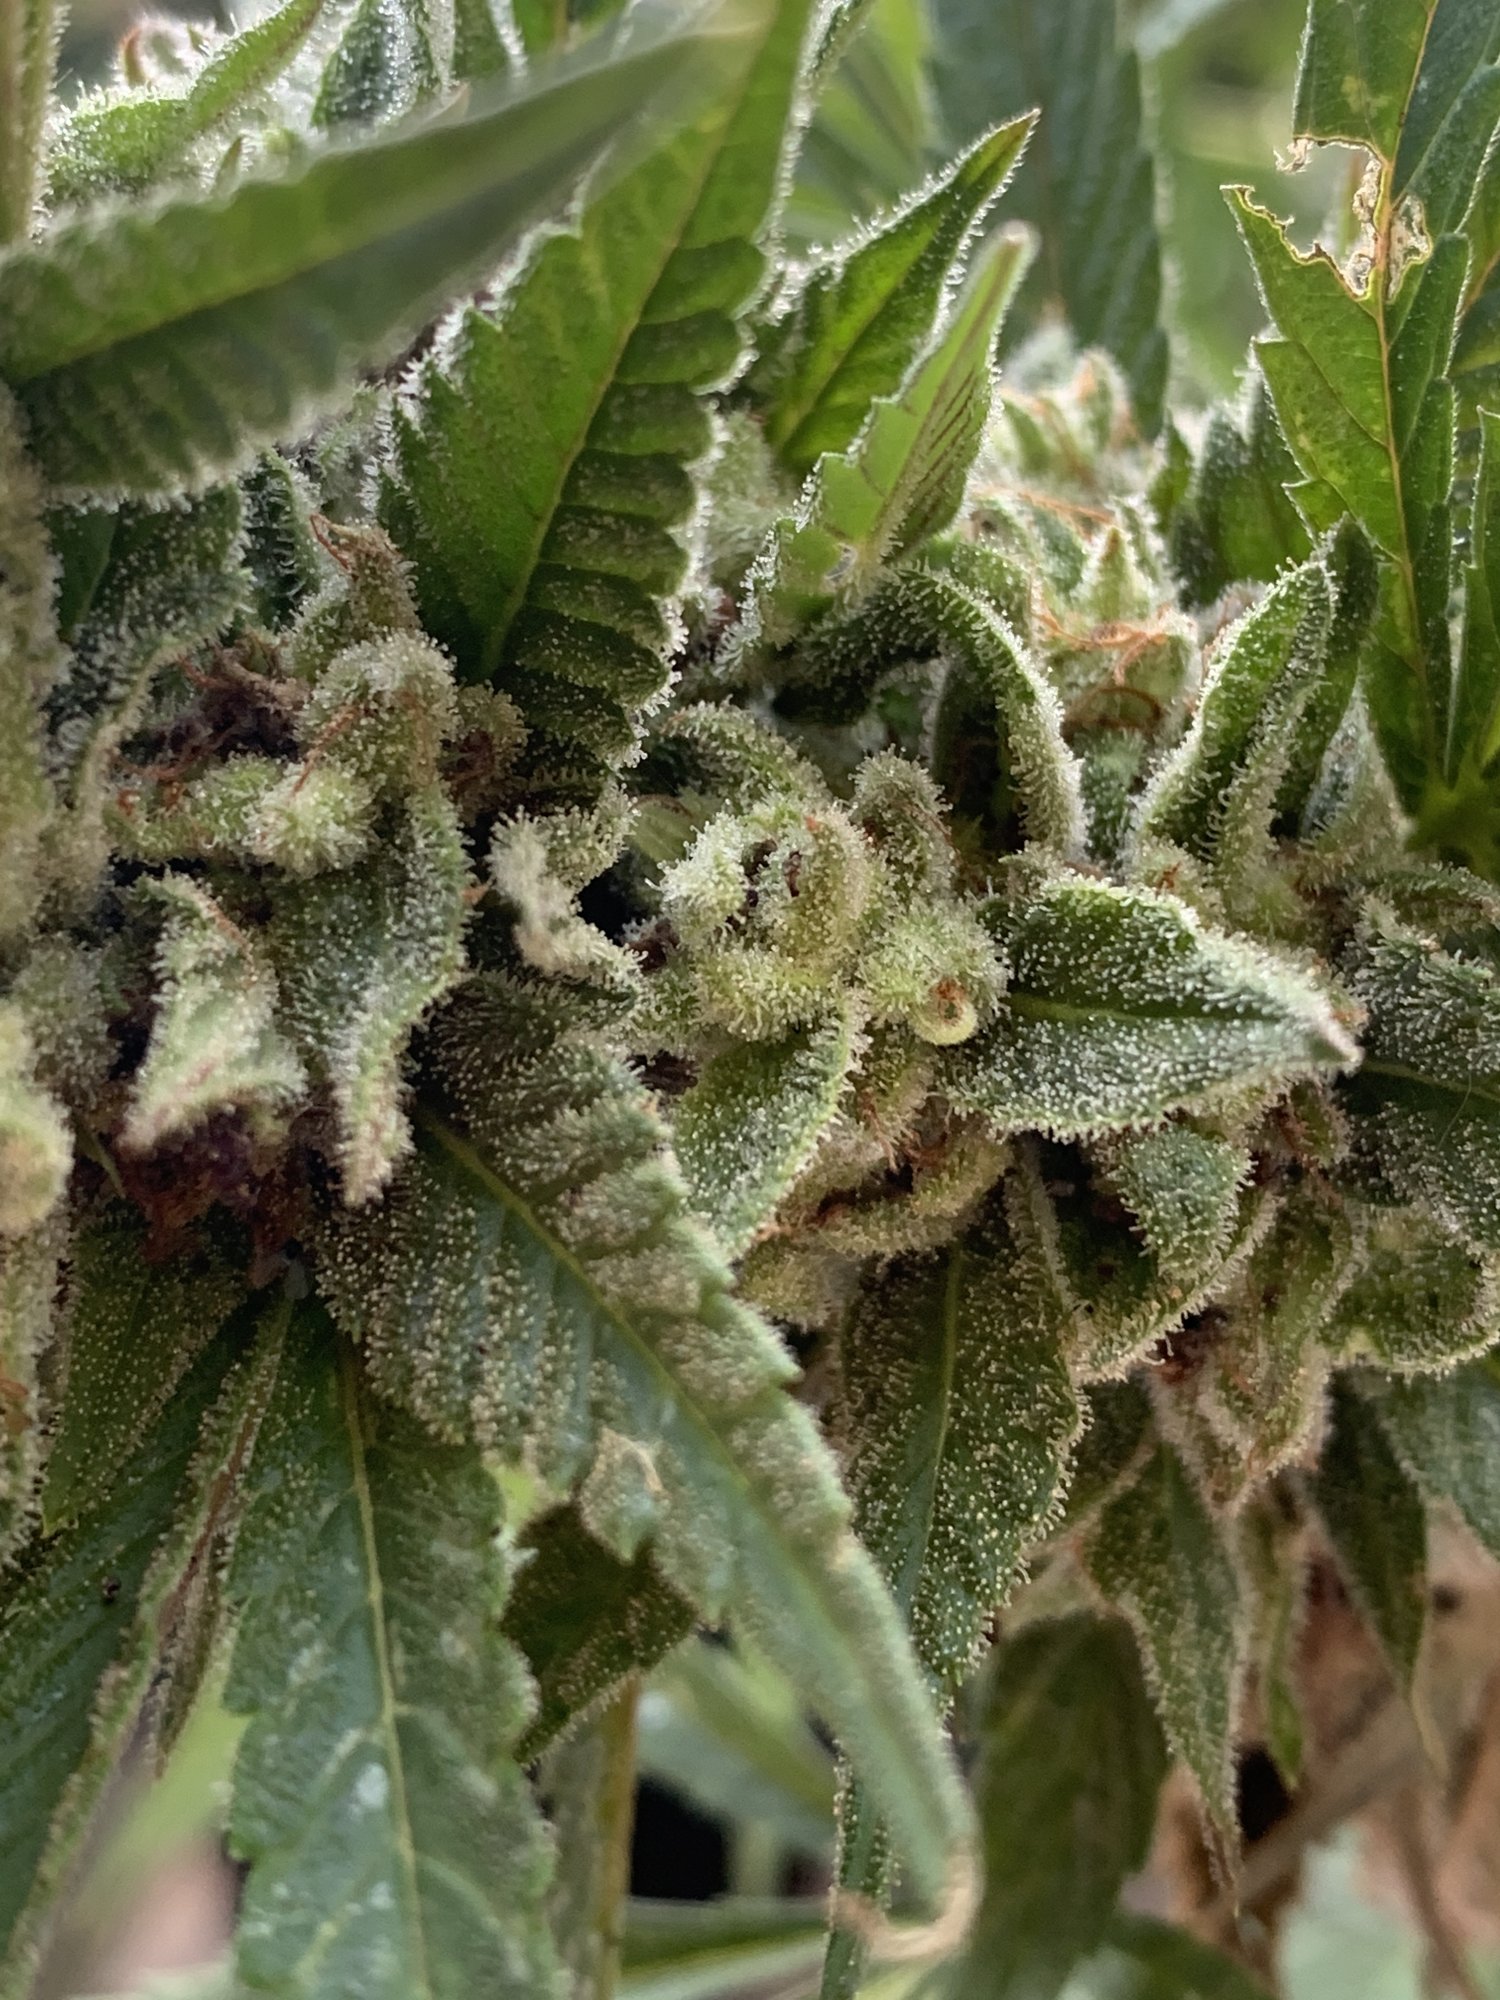 When should i harvest these